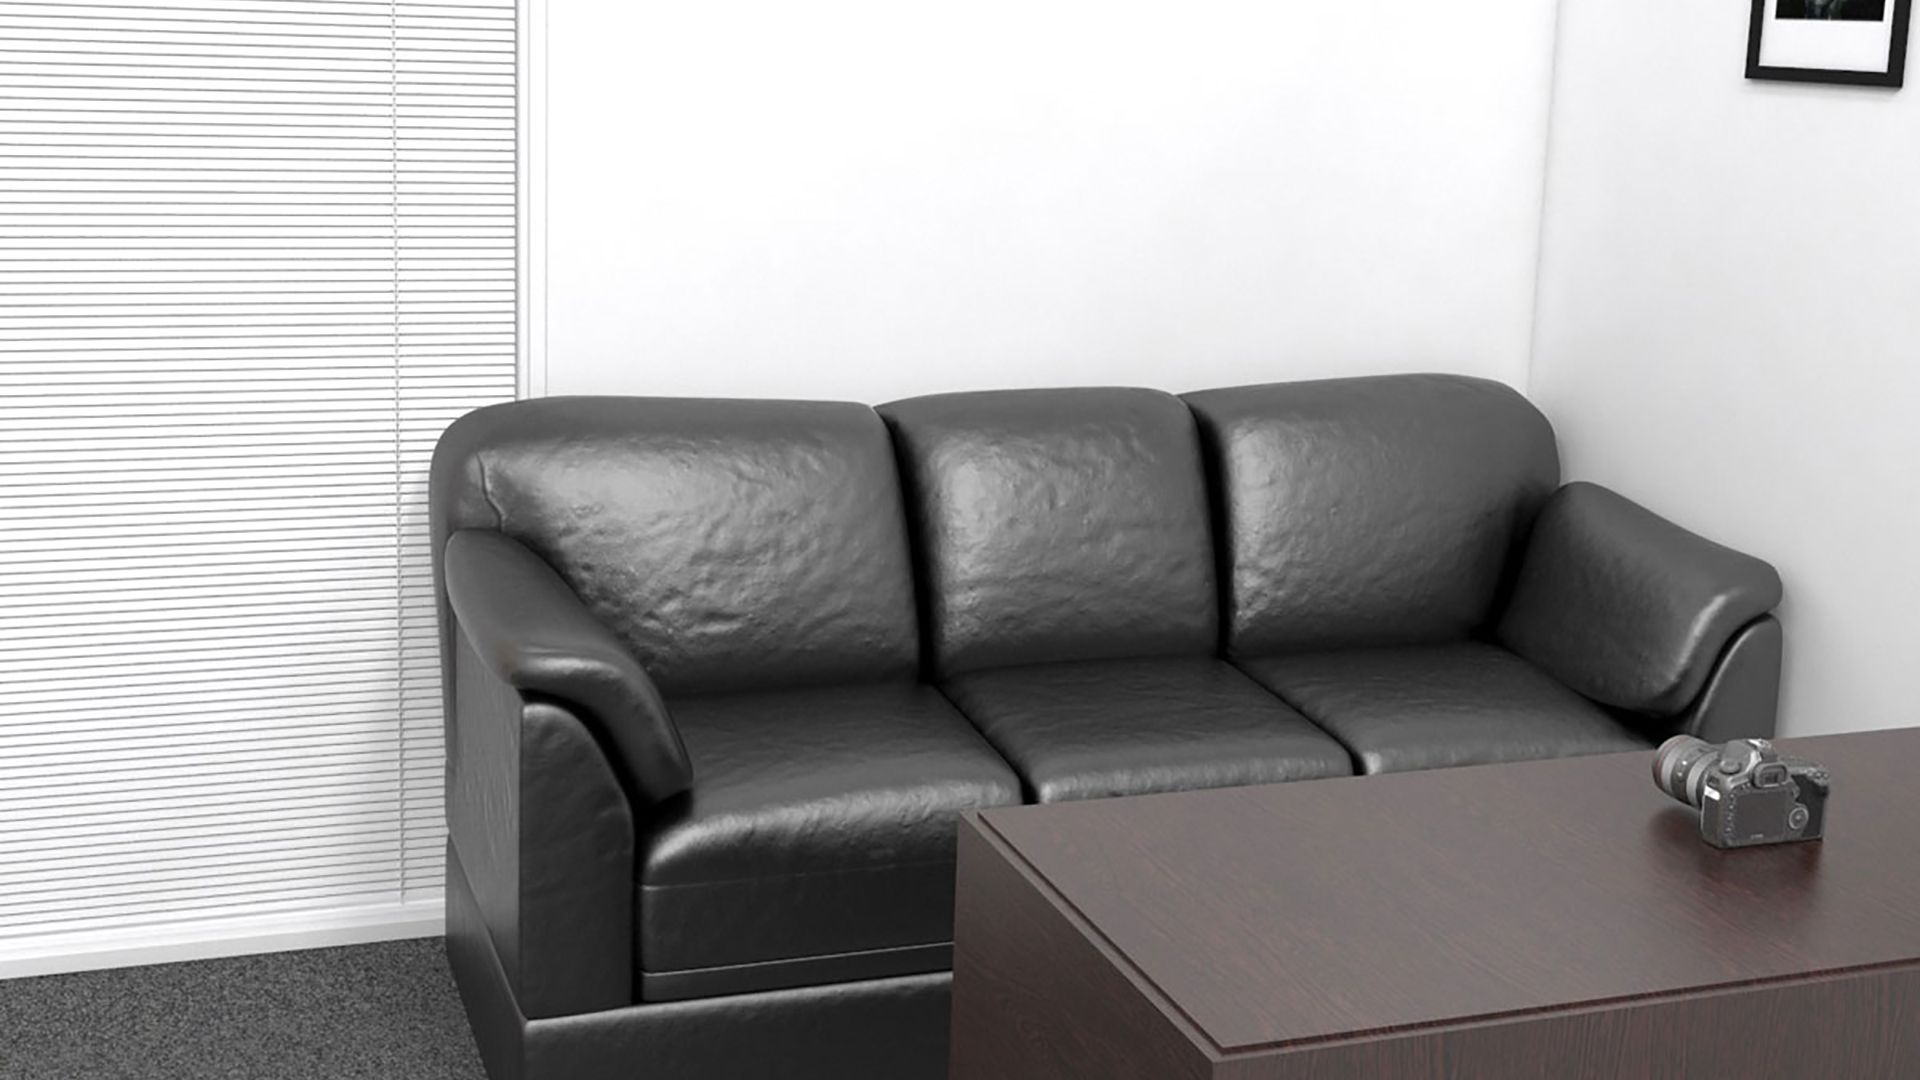 casting-couch.jpg